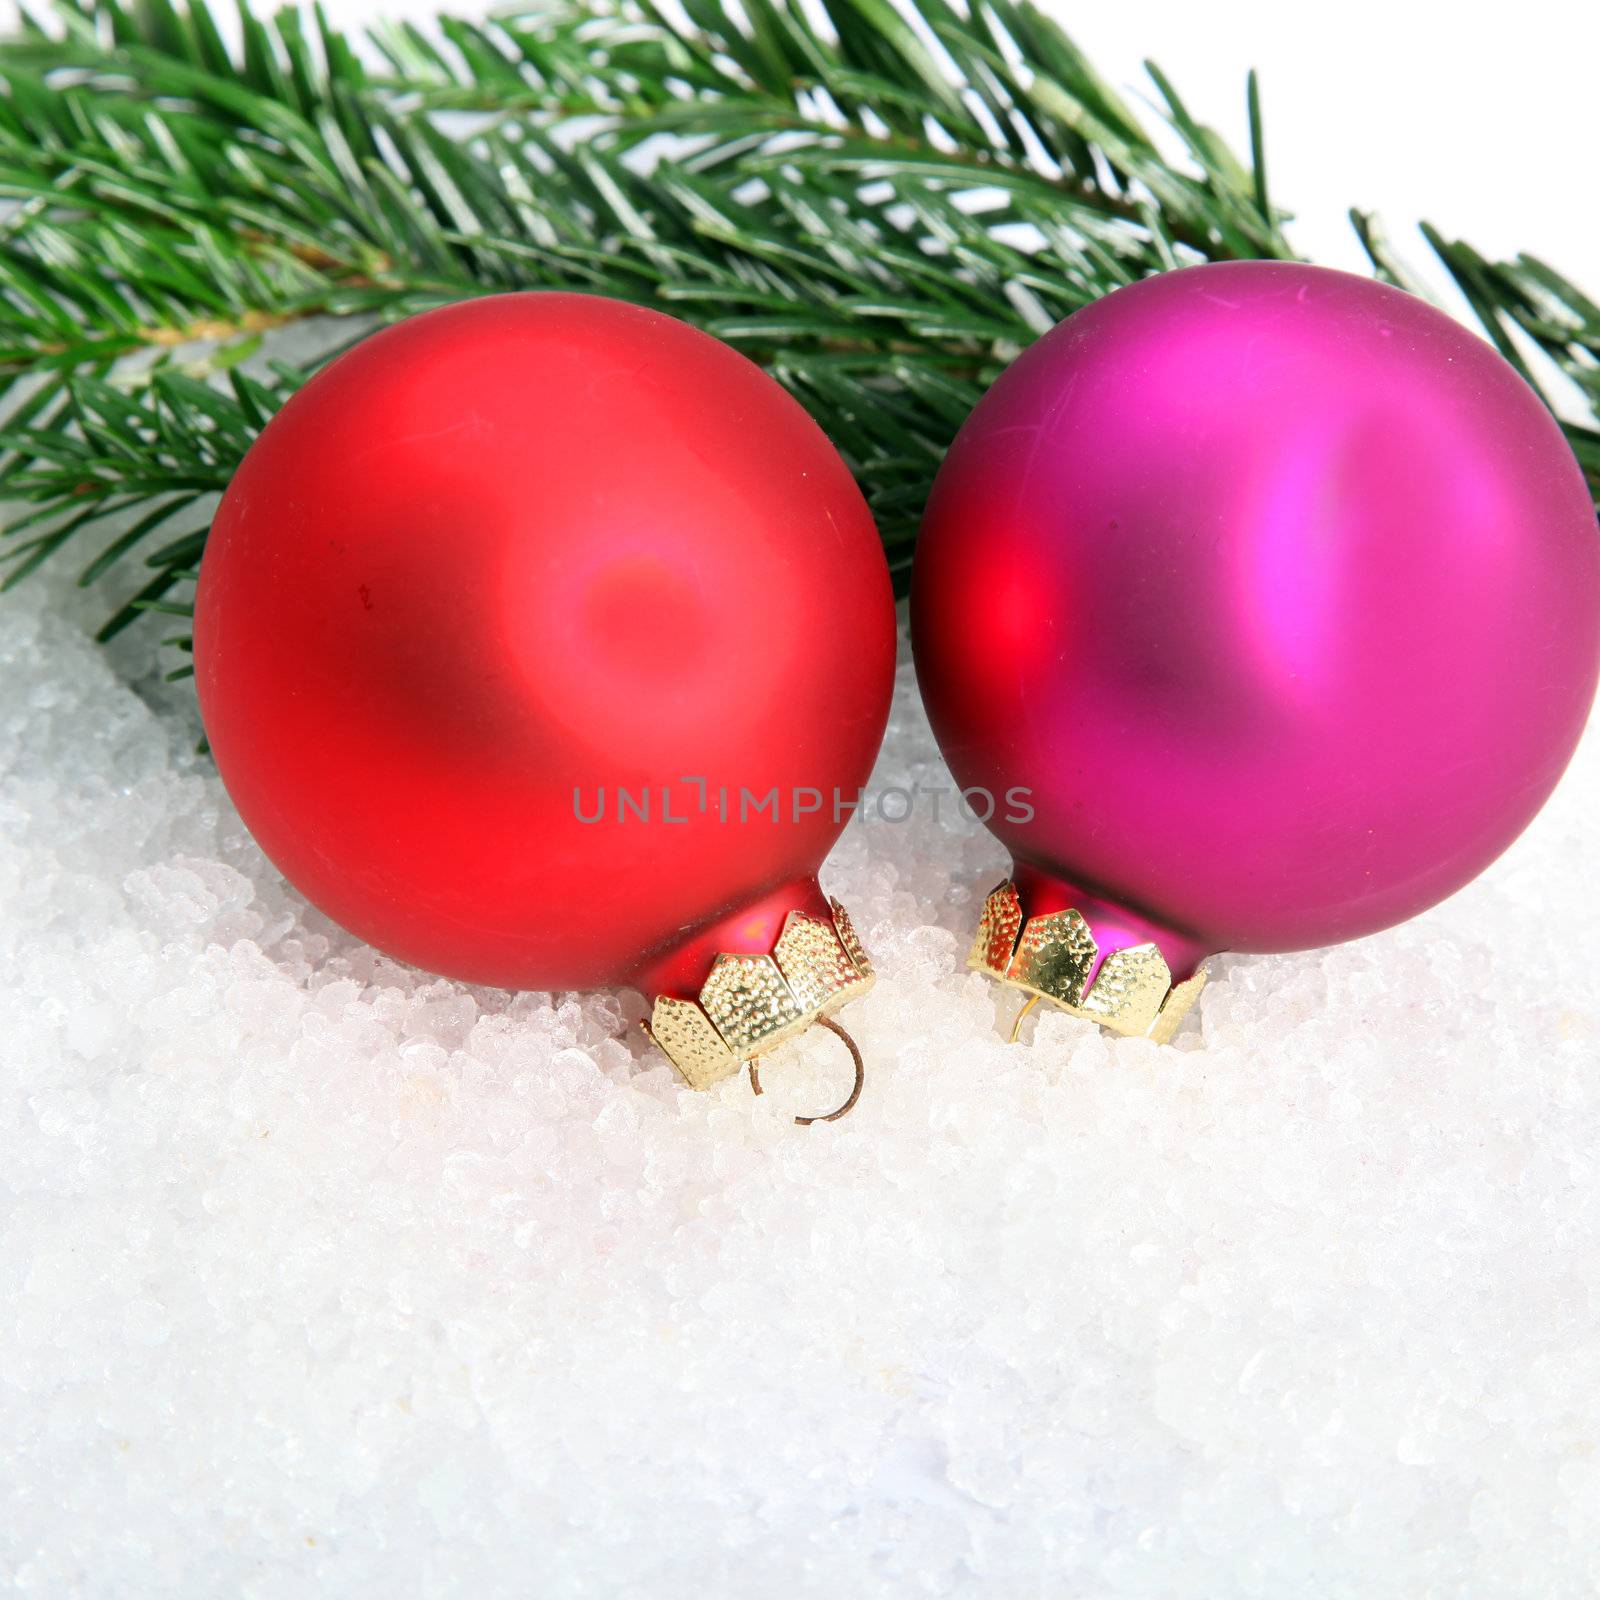 Two colorful Christmas baubles and pine needles on snow